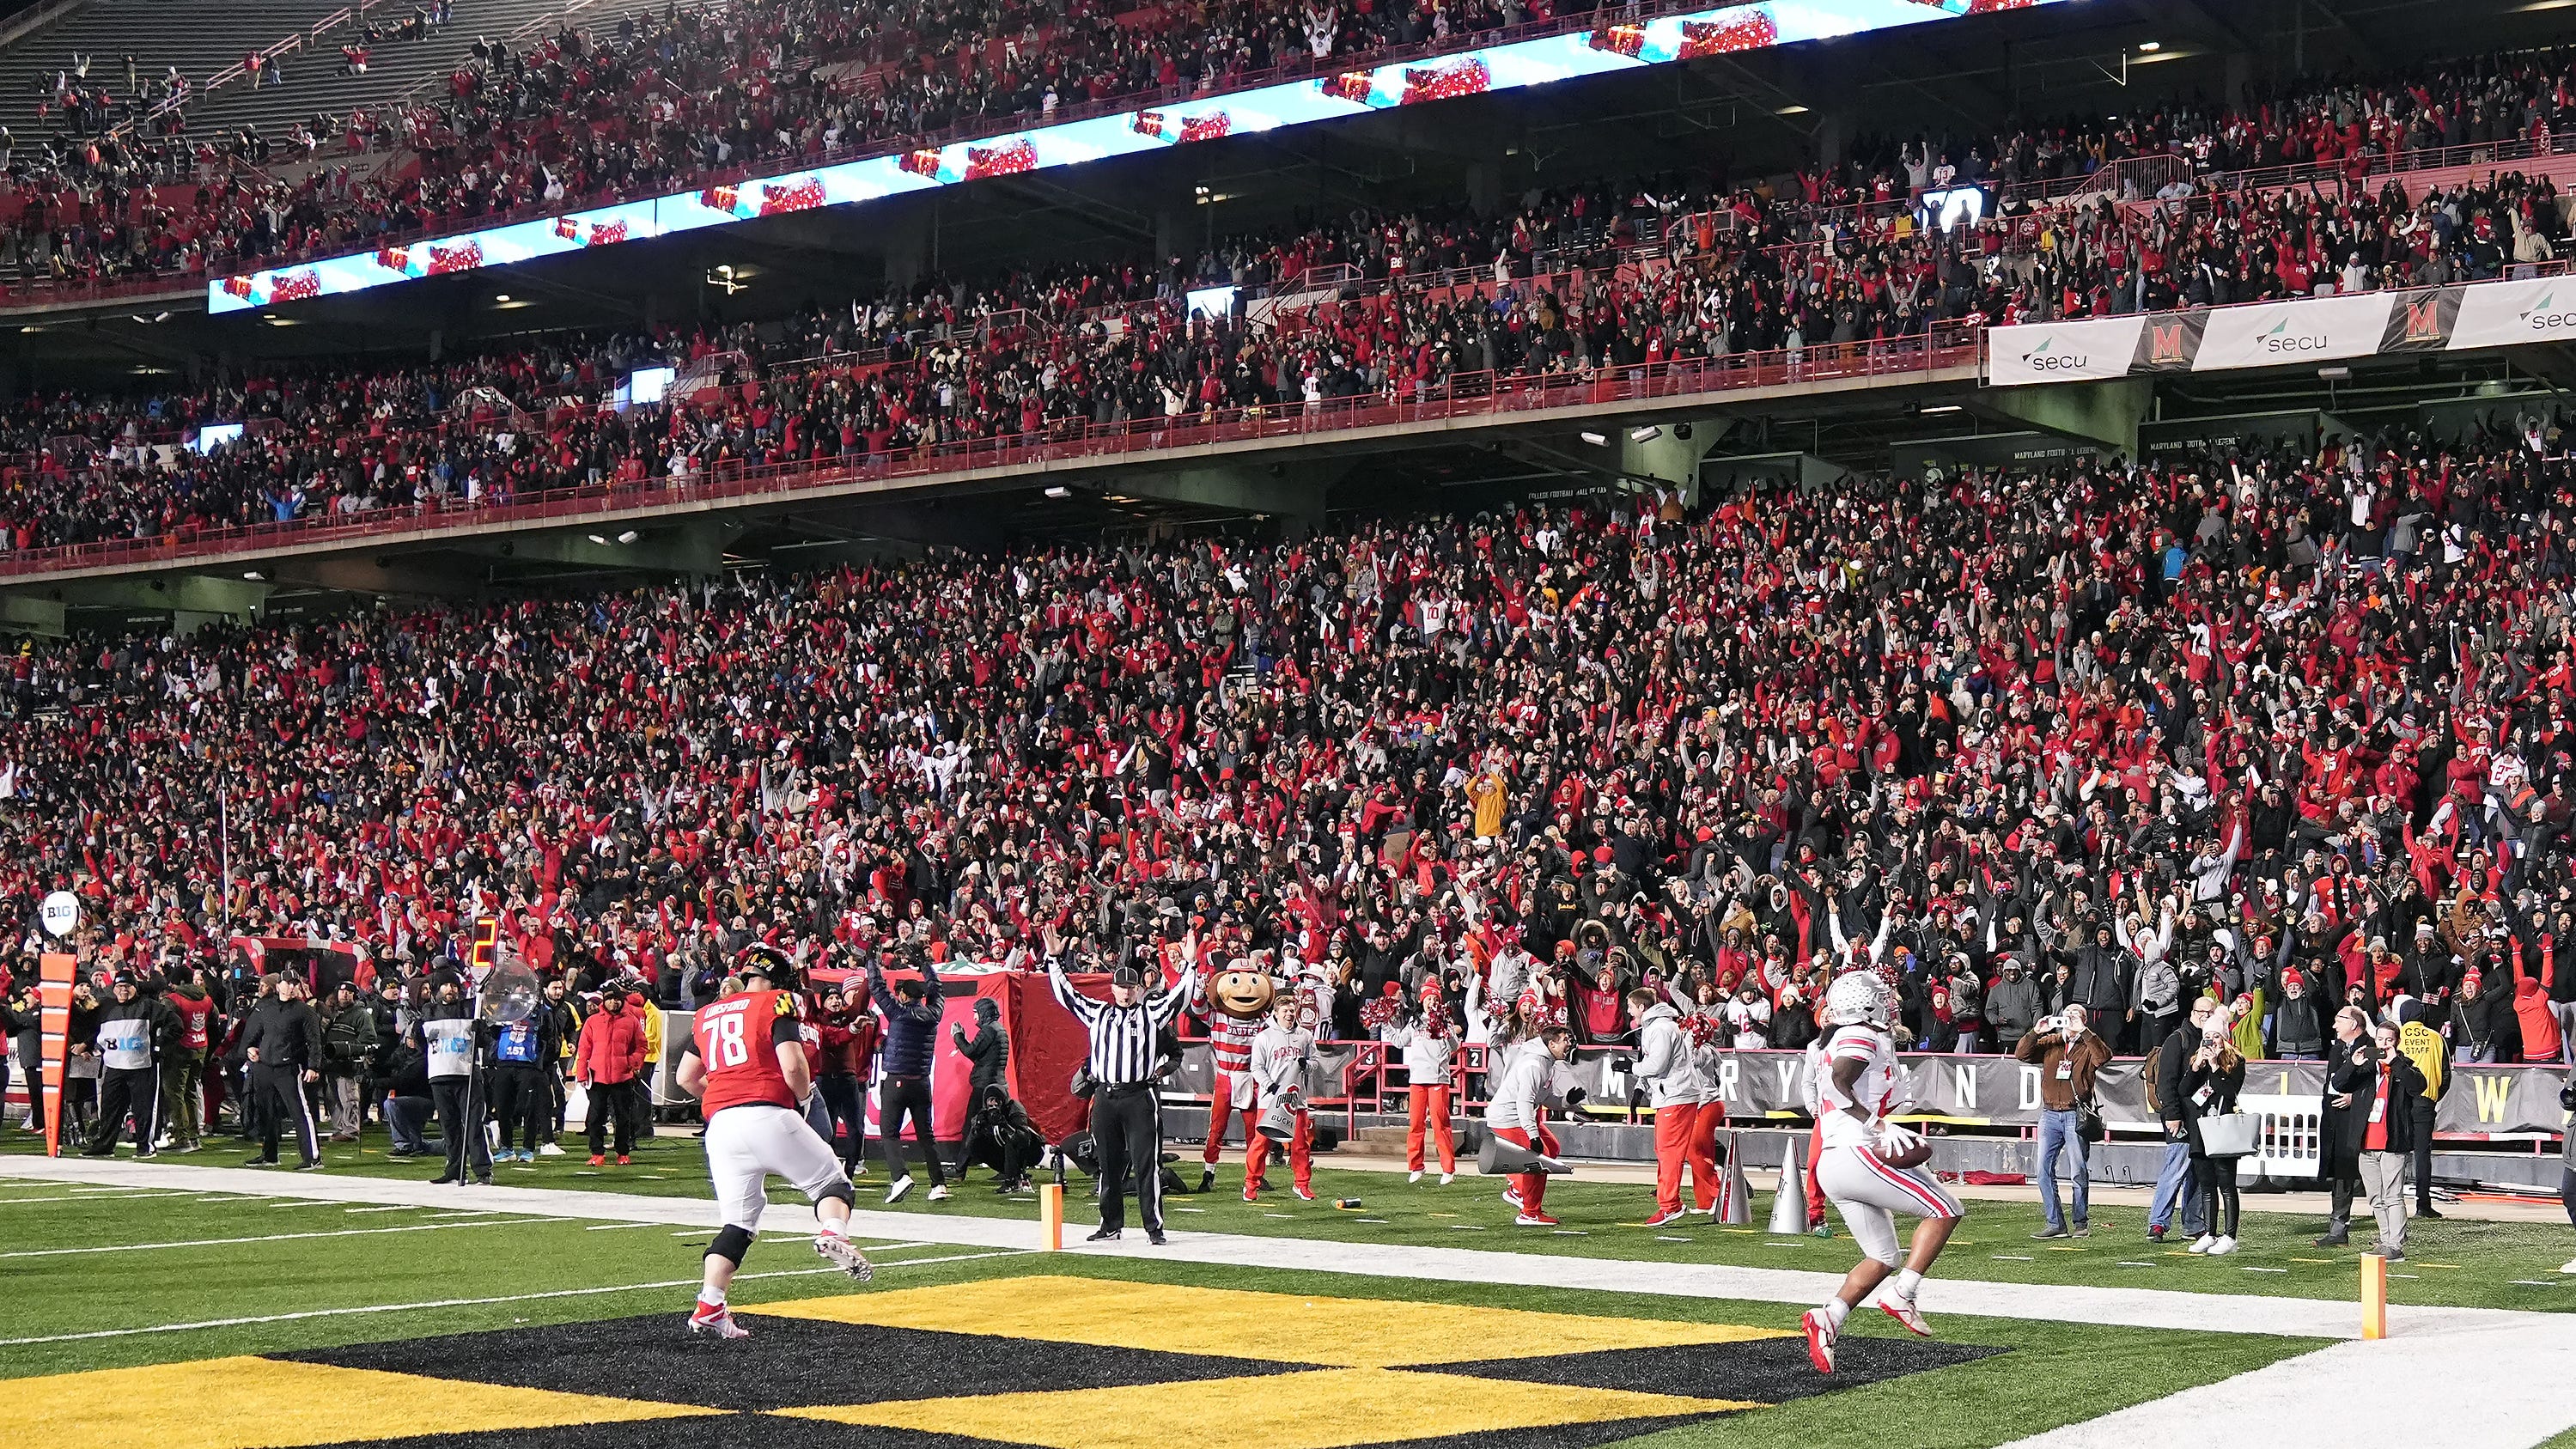  Ohio State improves to 11-0, now on to The Game vs. Michigan | Score: OSU 43, Maryland 30 